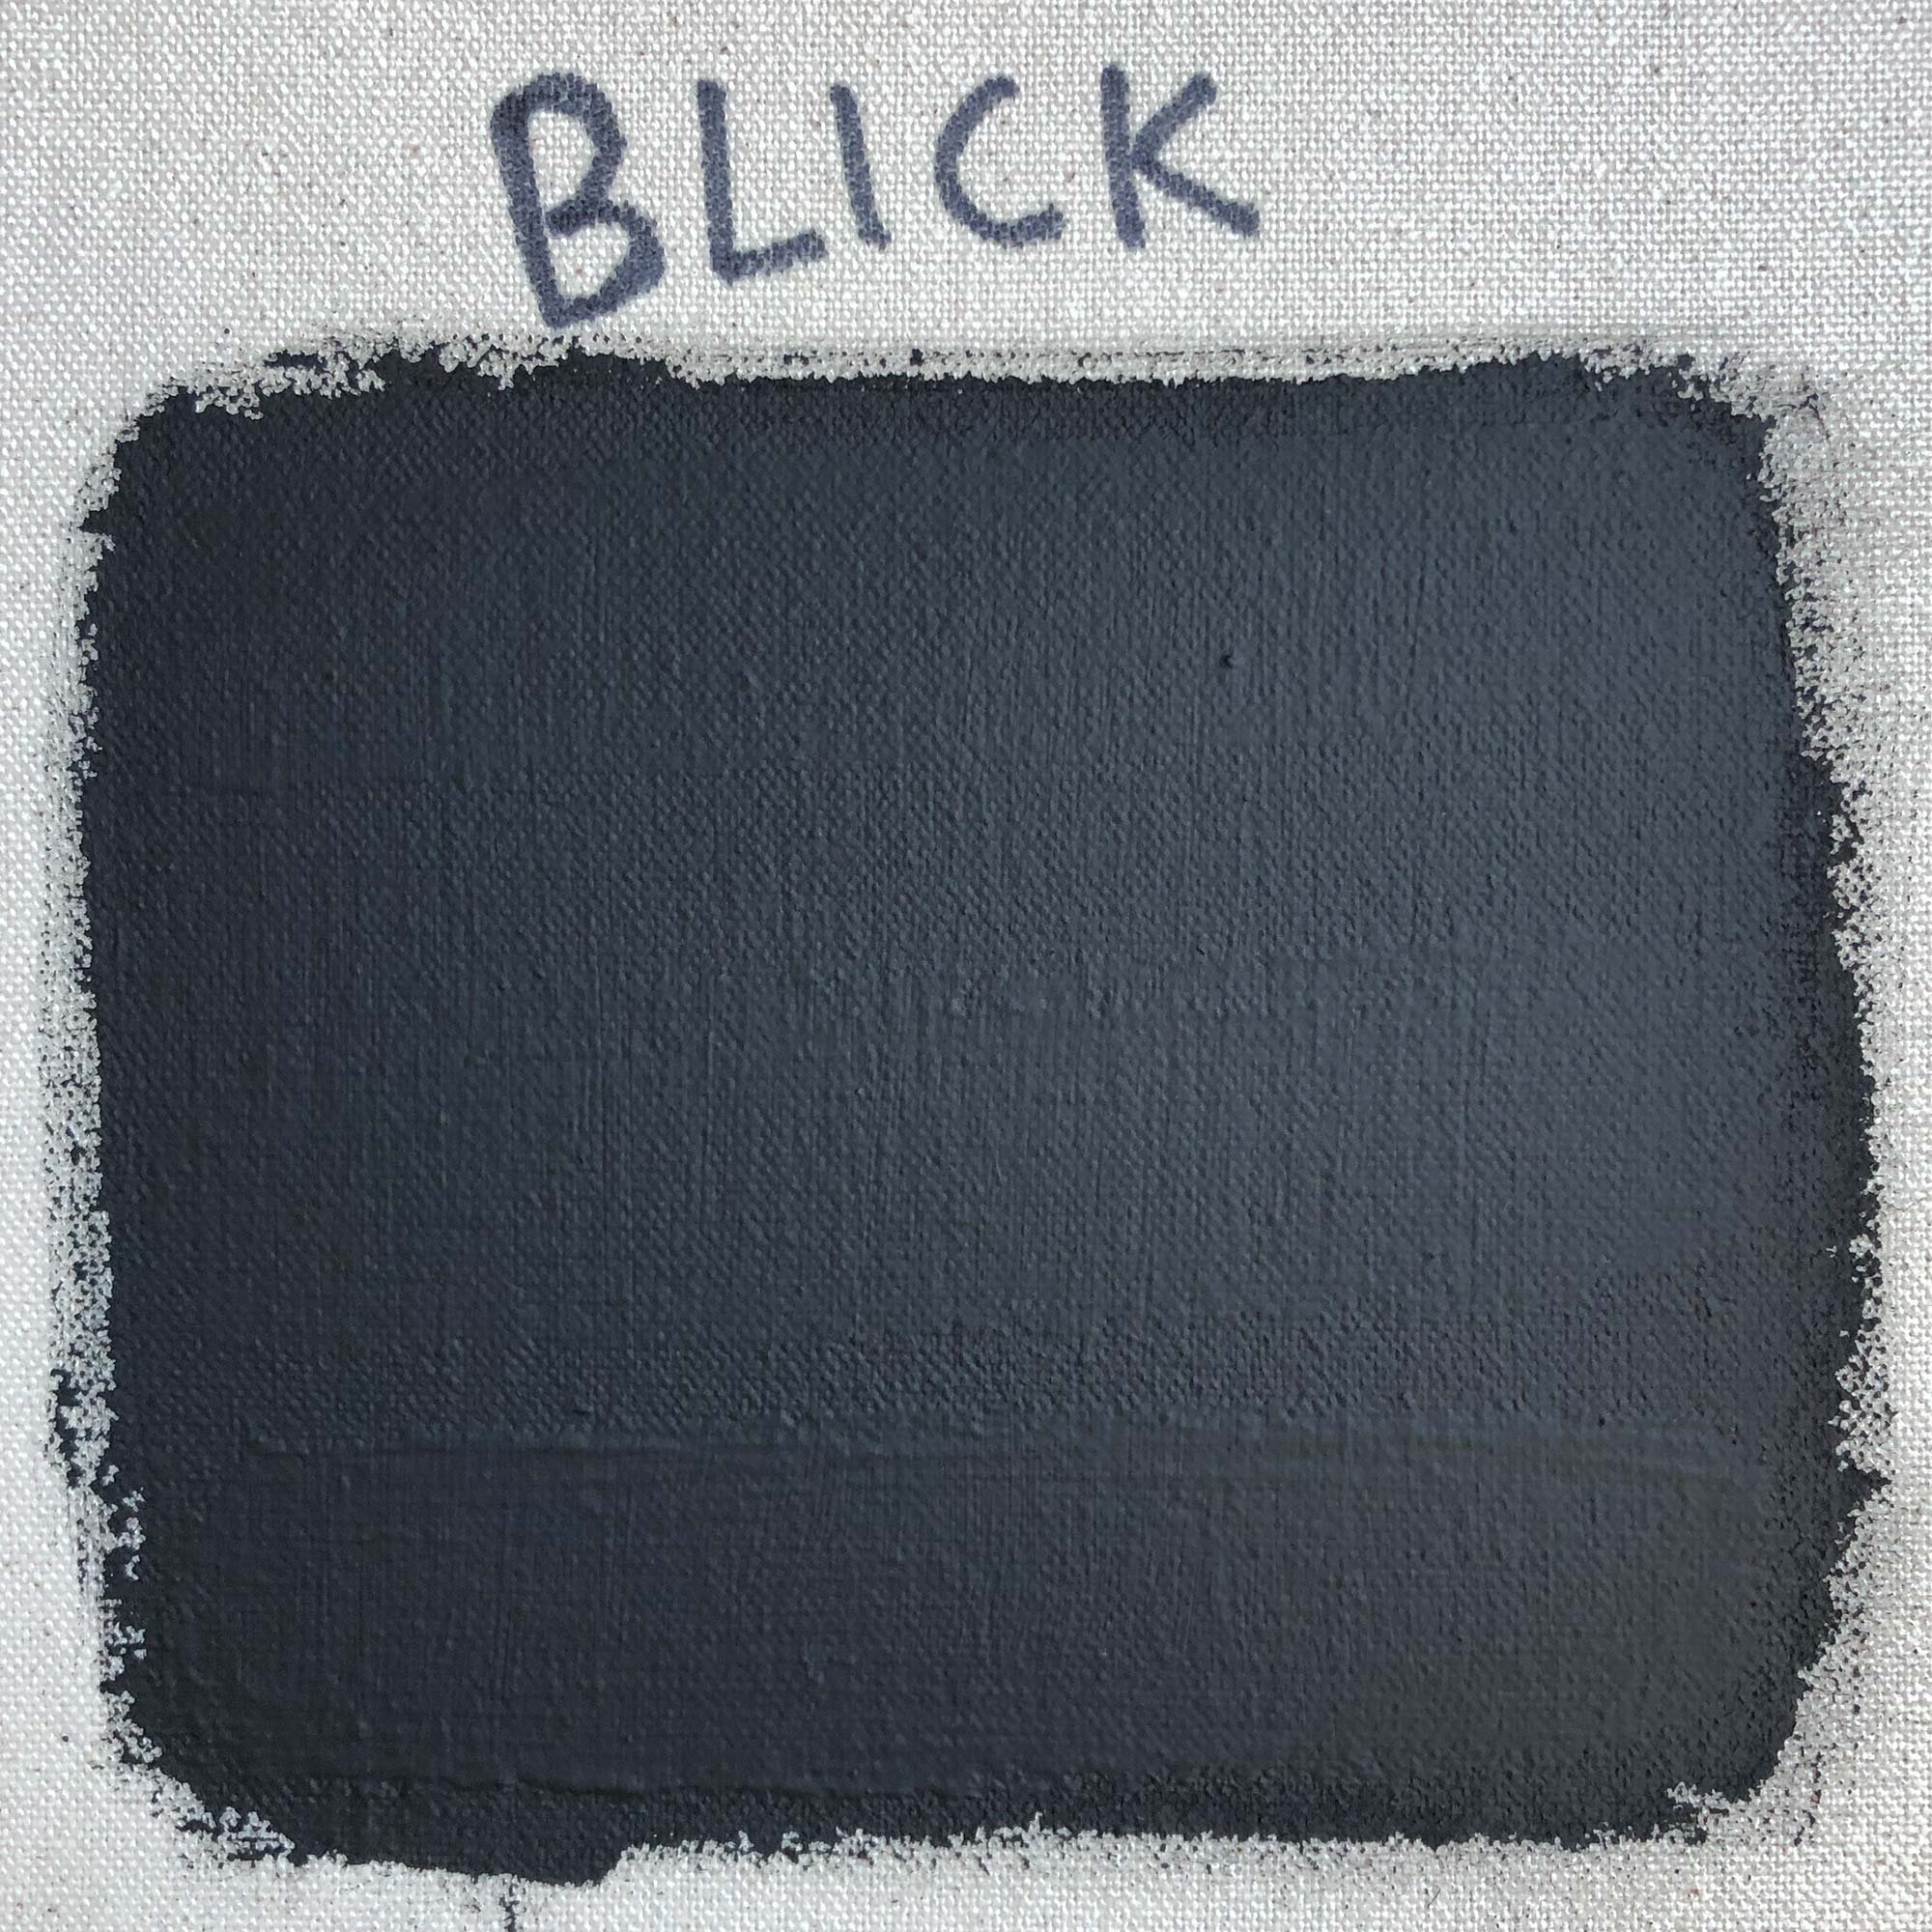 Black Gesso Acrylic Medium - 500 ml Professional Grade Surface Prep Paint  Applies Smoothly on Various Surfaces - Liquid Primer for Canvas, Paper,  Cardboard, Wood and Other Arts and Crafts Projects 